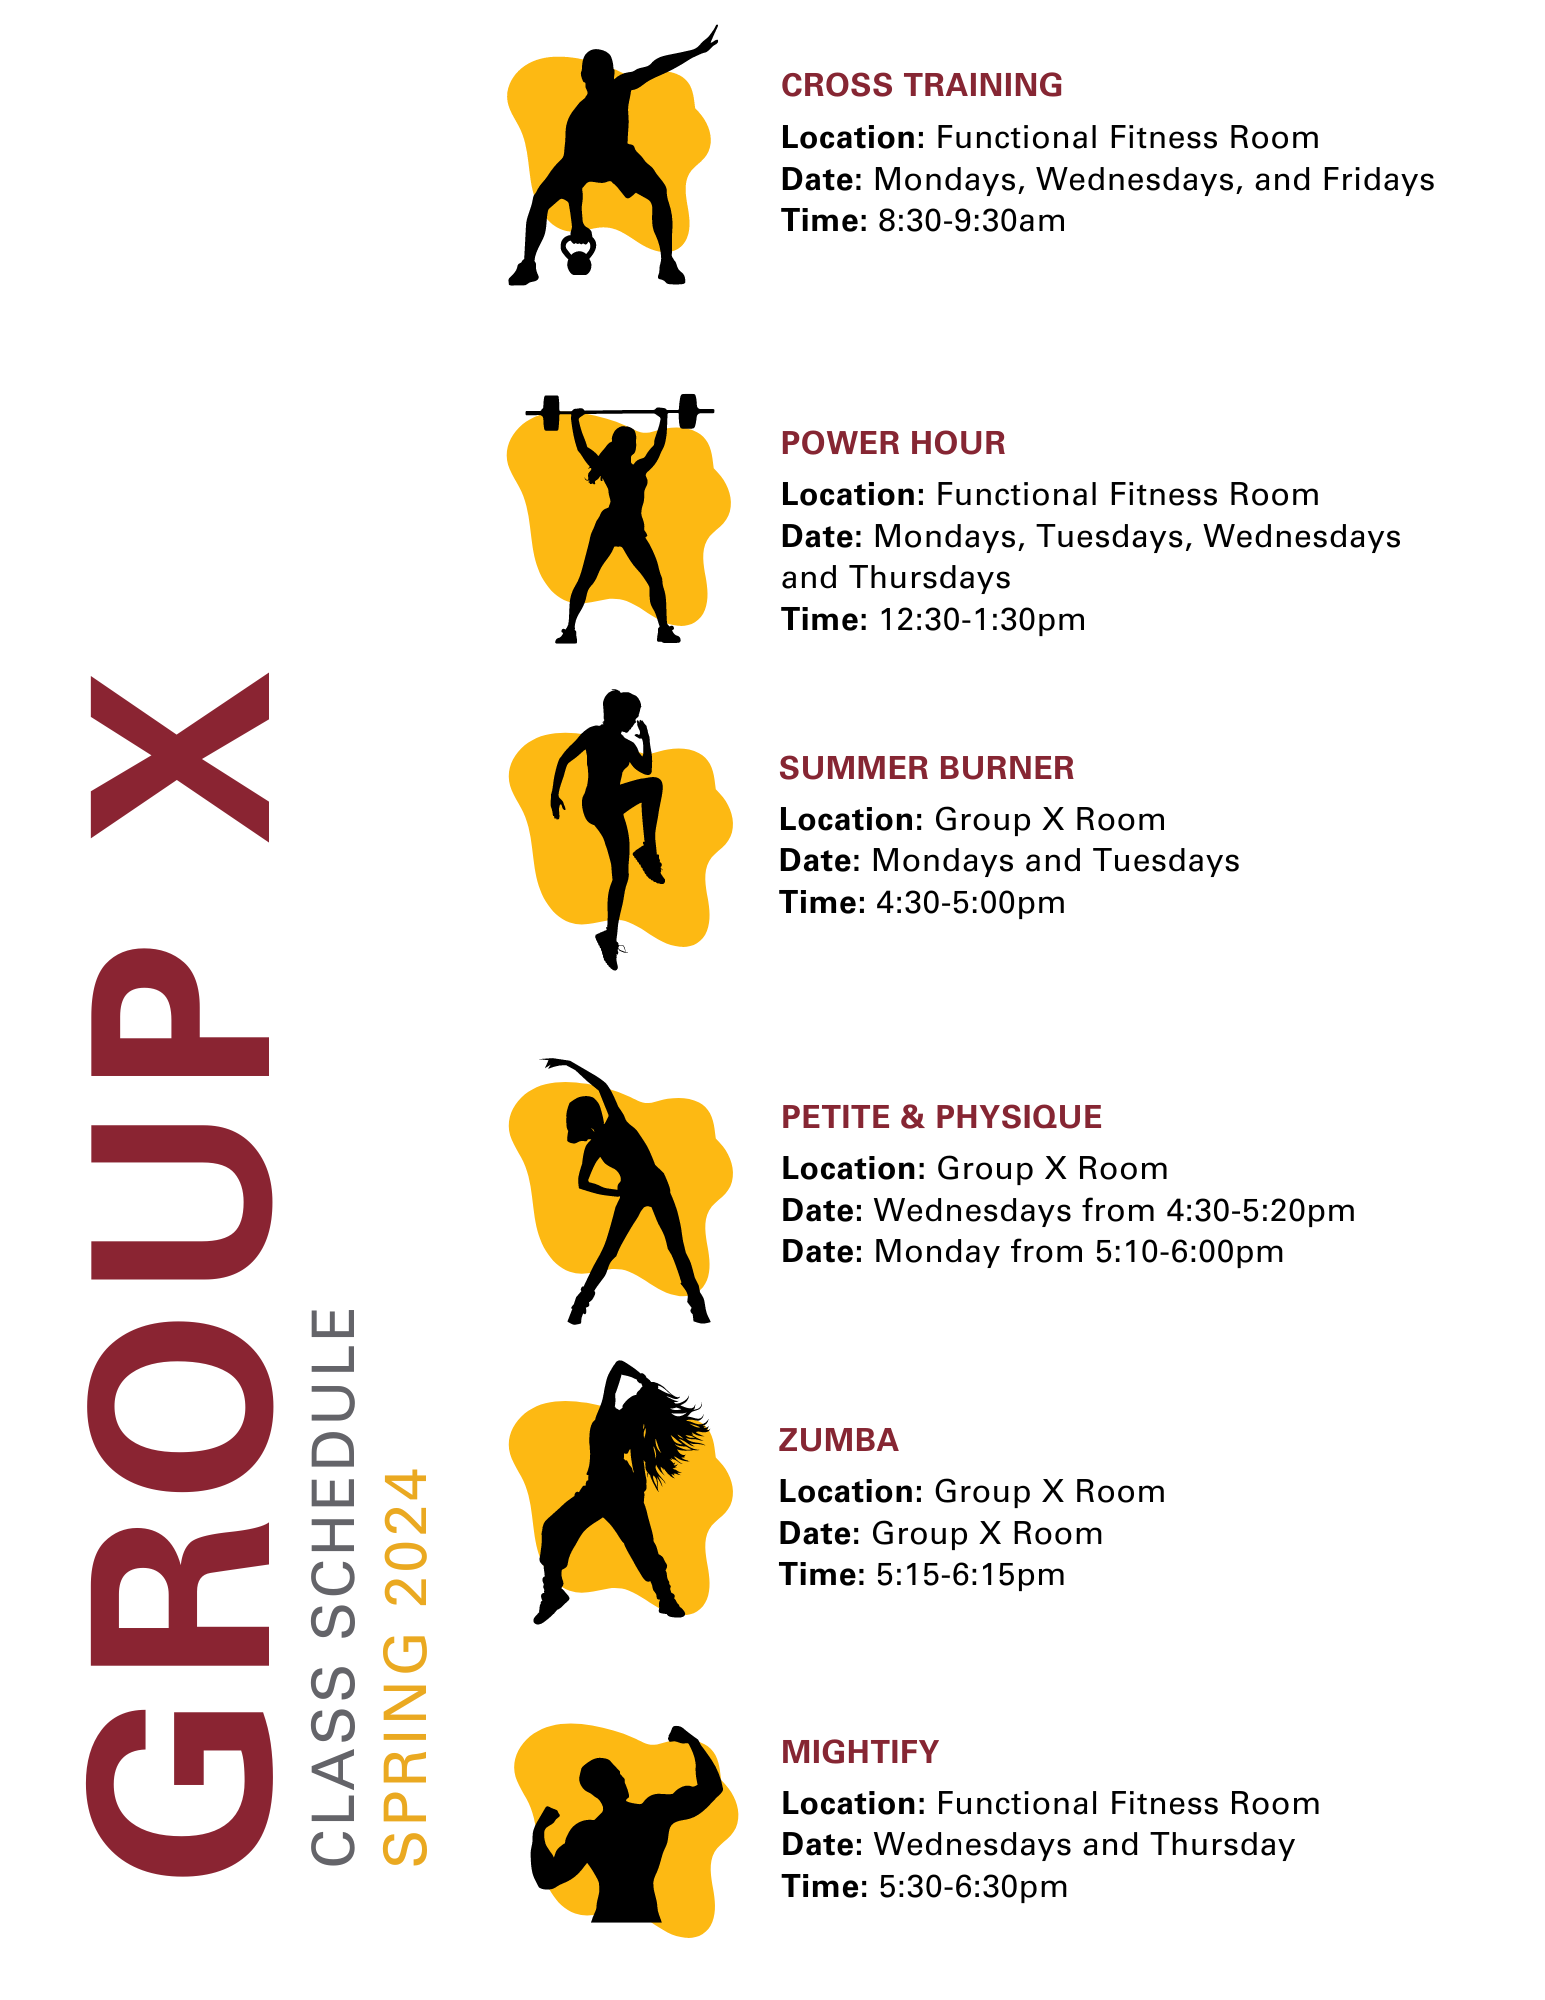 Group Fitness Classes  Division of Academic & Student Affairs